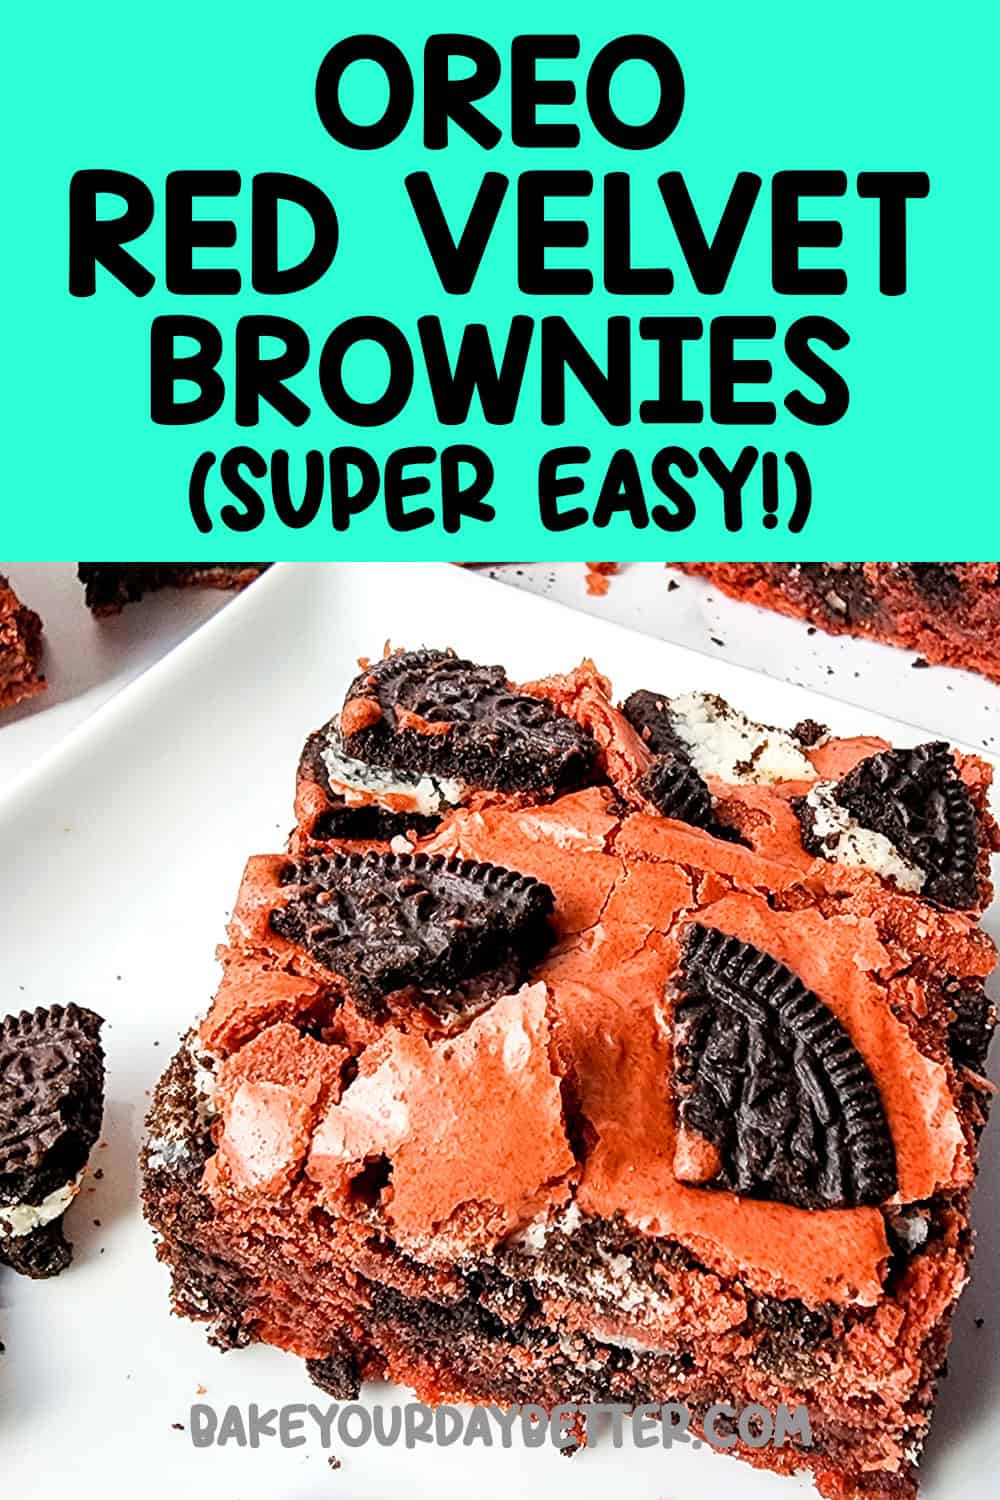 picture of oreo red velvet brownie on plate with text overlay that says: oreo red velvet brownies super easy!